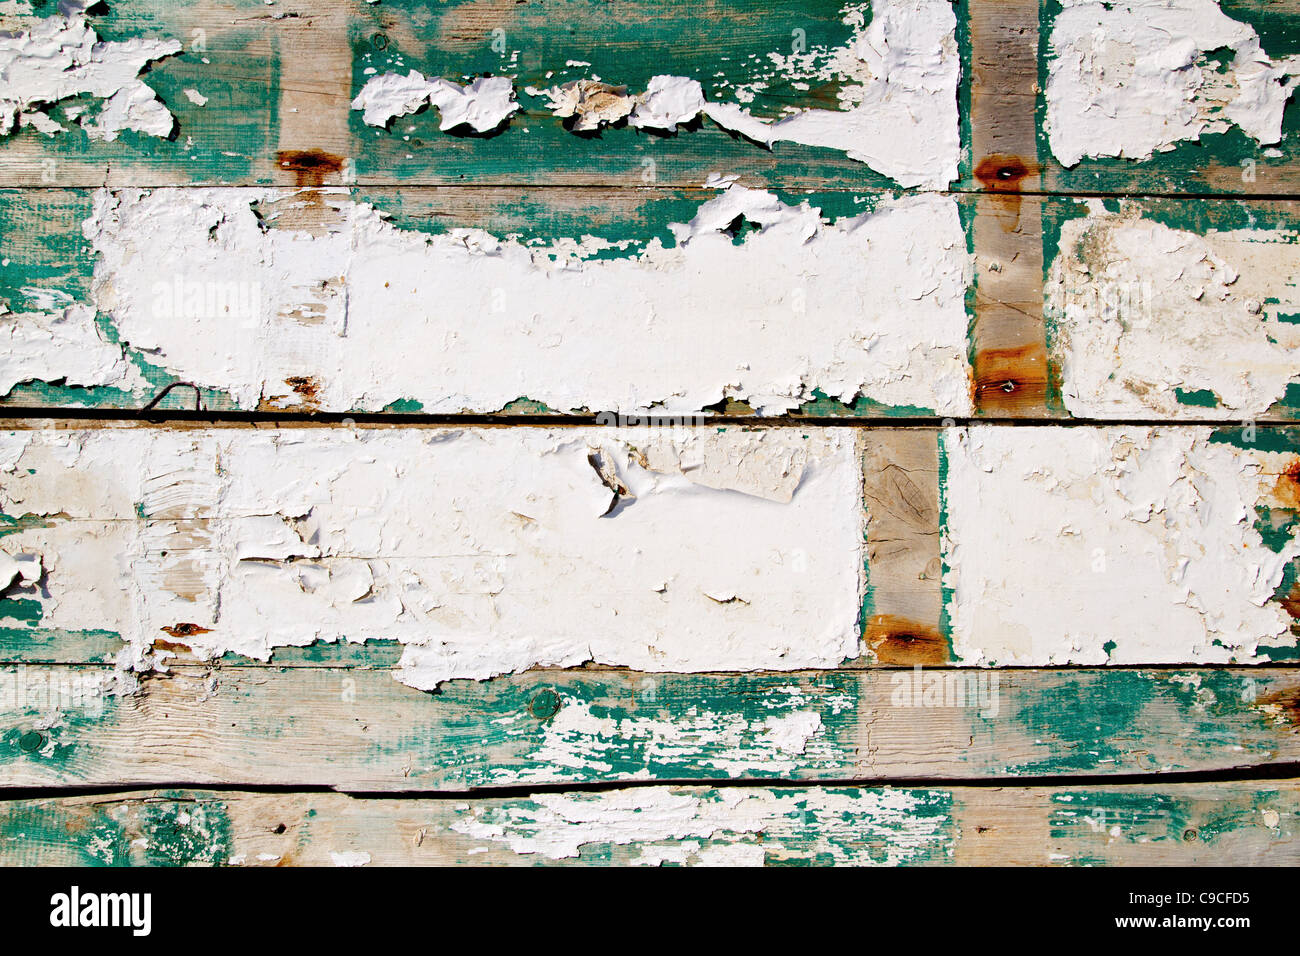 grunge texture wood painter in white and green Stock Photo